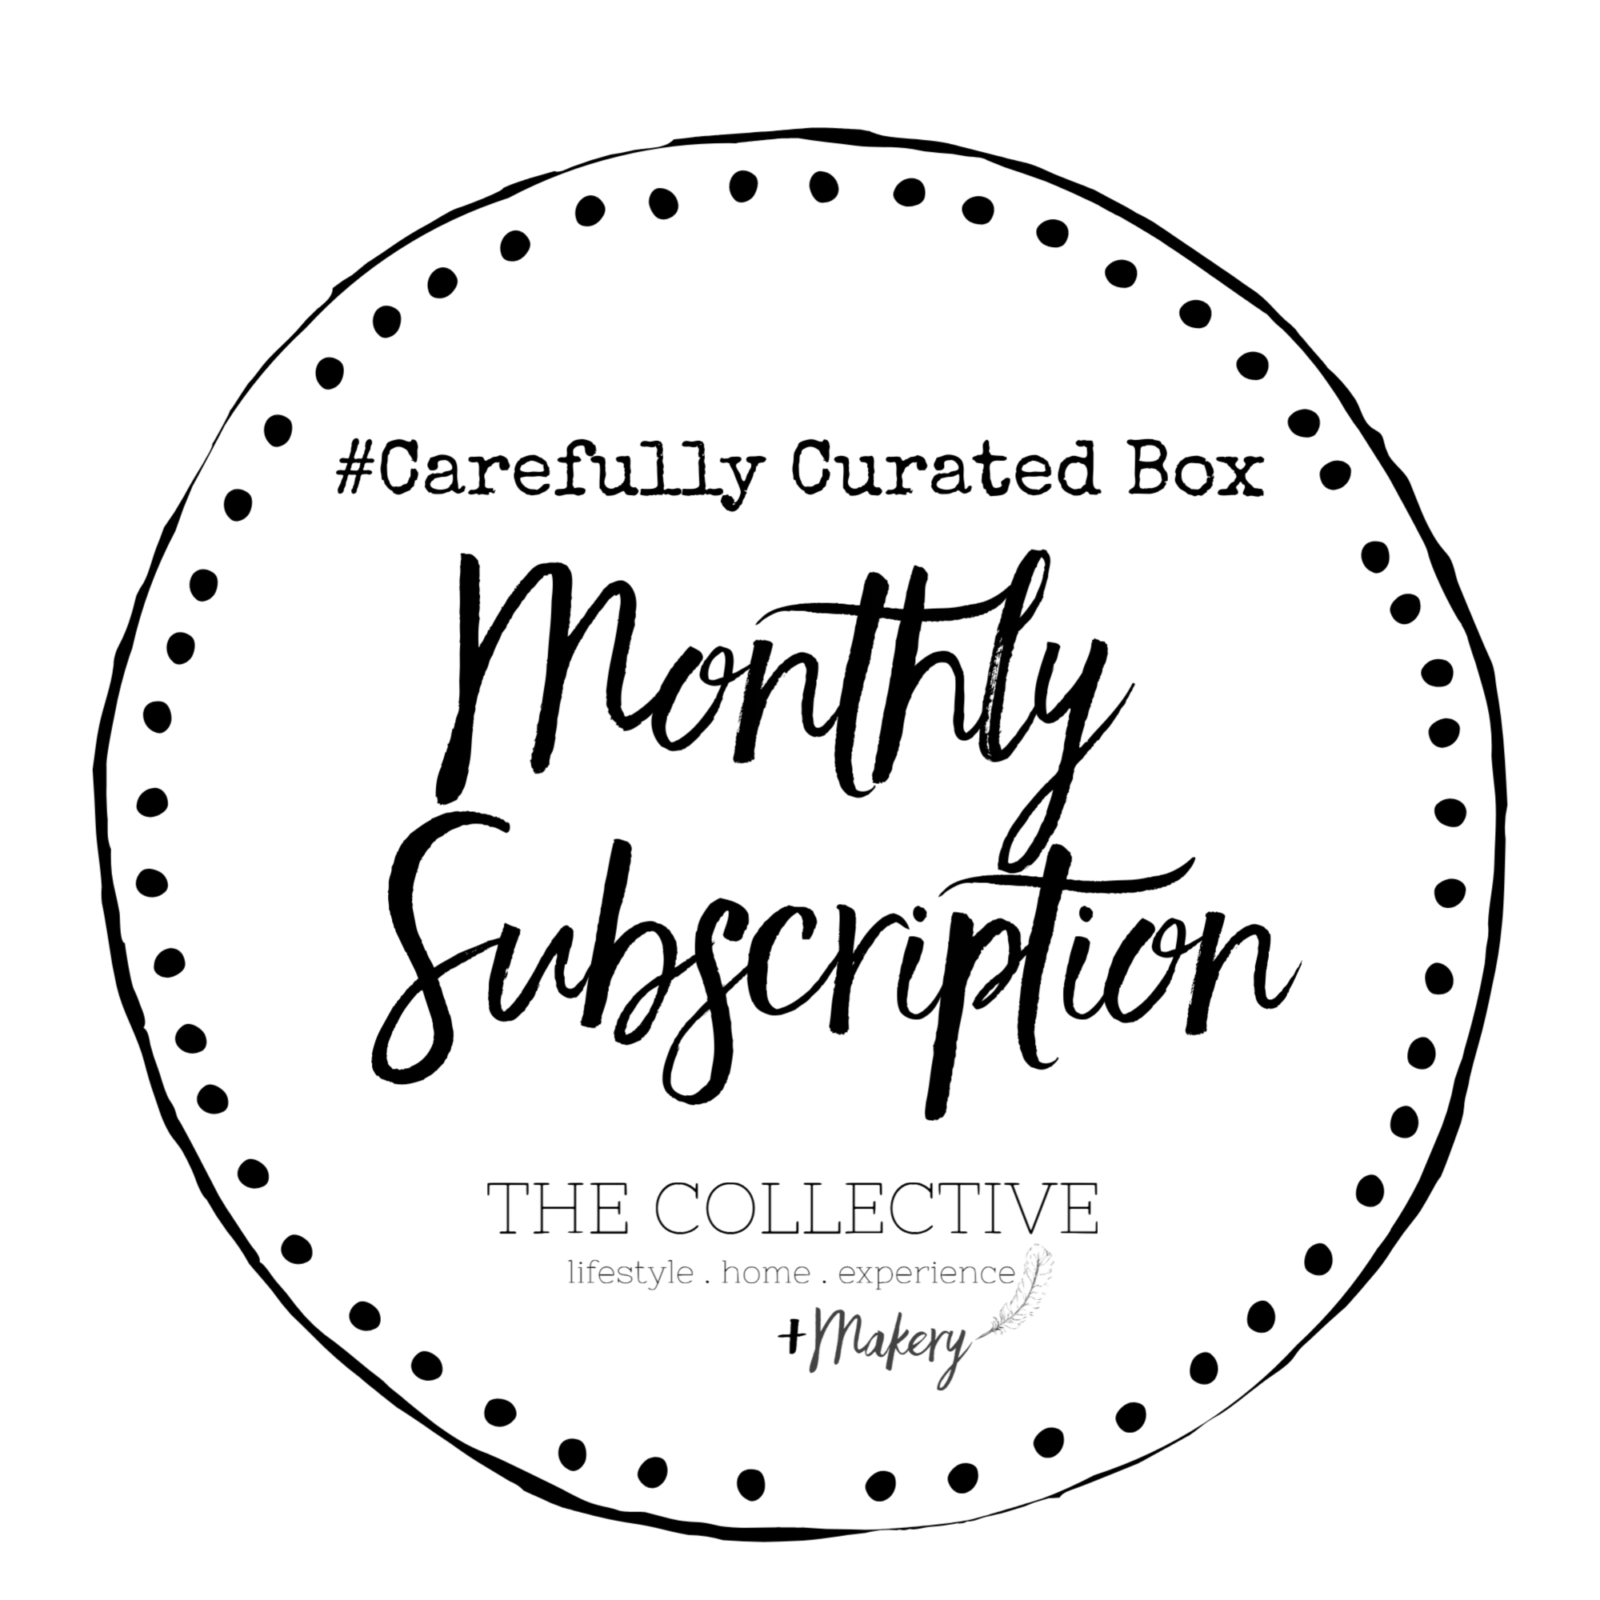 Monlthy Subscription box Carefully Curated